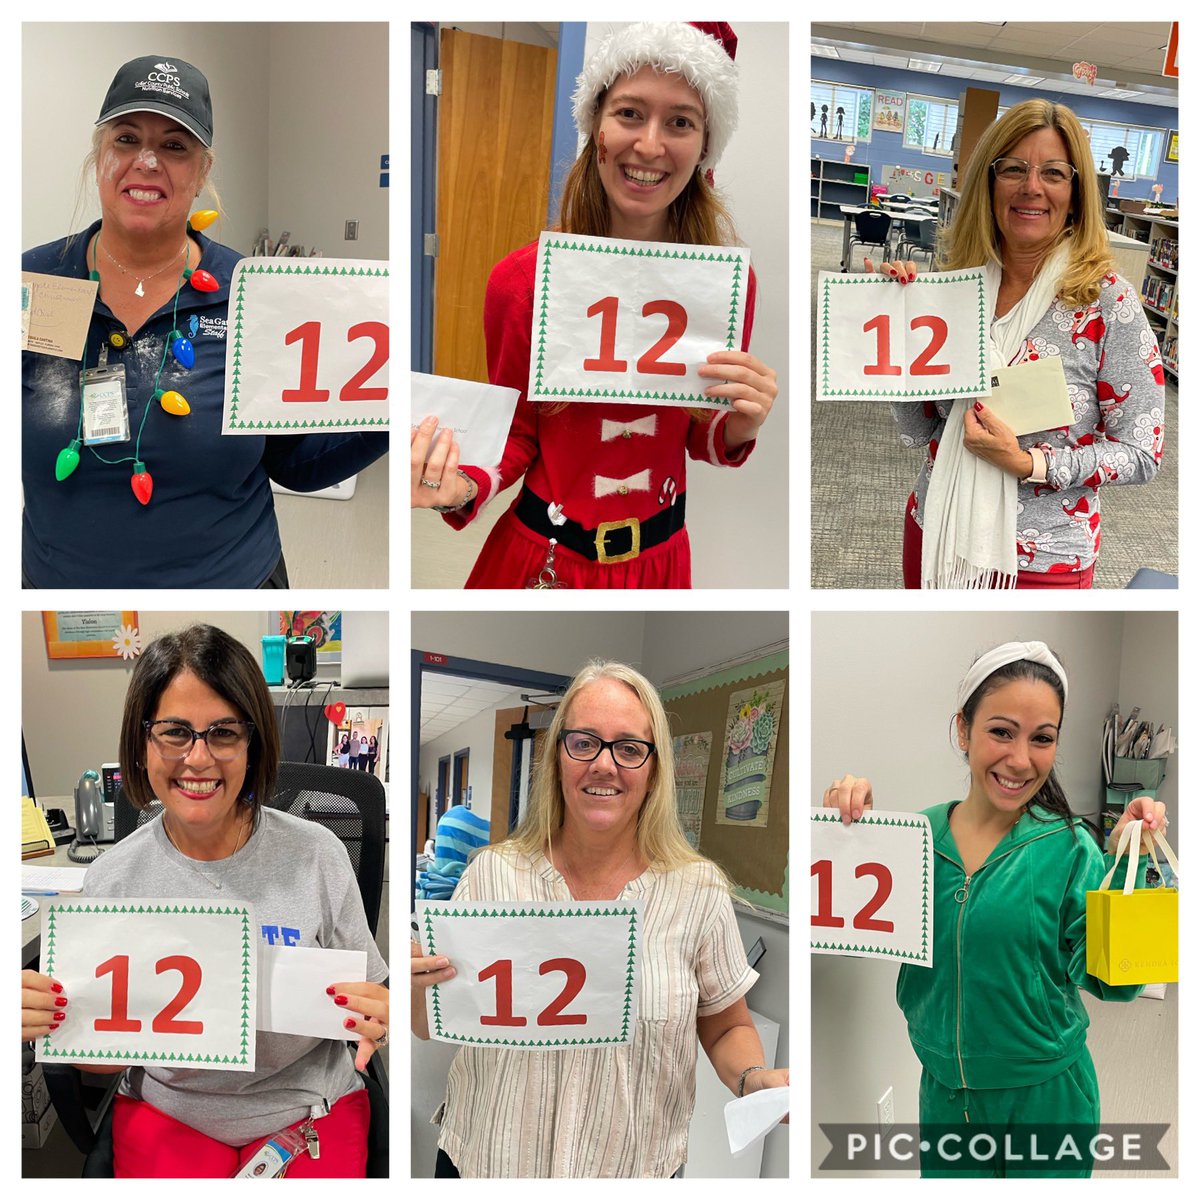 It’s the 12th Day of the 12 Days of Giveaways!! Winners: Mrs. Nickie, Miss Stetson, Mrs. Sandy, Mrs. Maria, Mrs. Maggie, & Mrs. Puka! ✨🎄🎅🏻

#12DaysofGiveaways #themostwonderfultime
@SeaGateES 
Thanks for playing along! Until next year…☺️